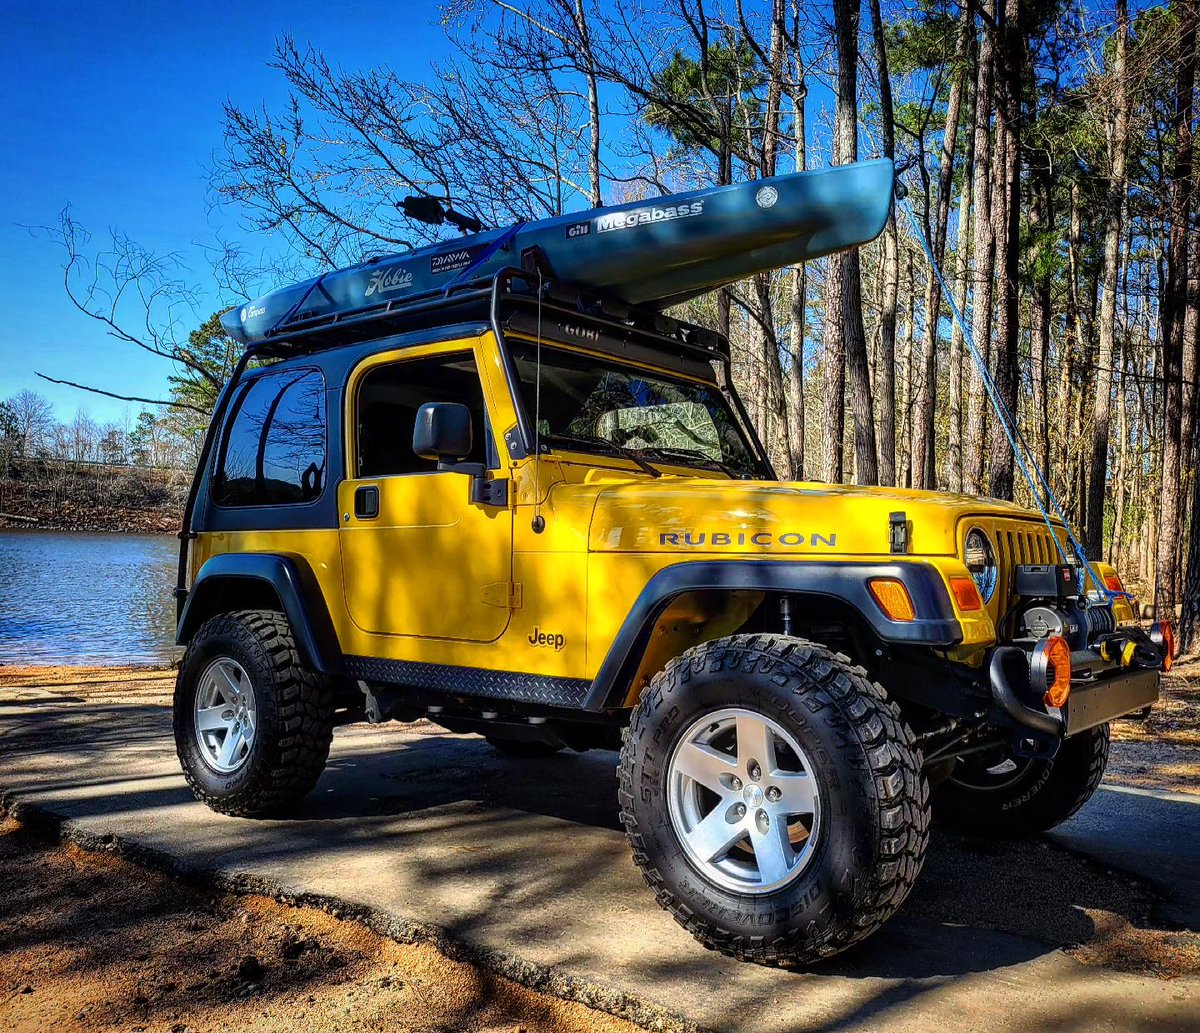 Warmer weather means more possibilities for adventure! Where will you go with your Cooper® tires? 📸: @yellow_rubicon_true_jeep on IG